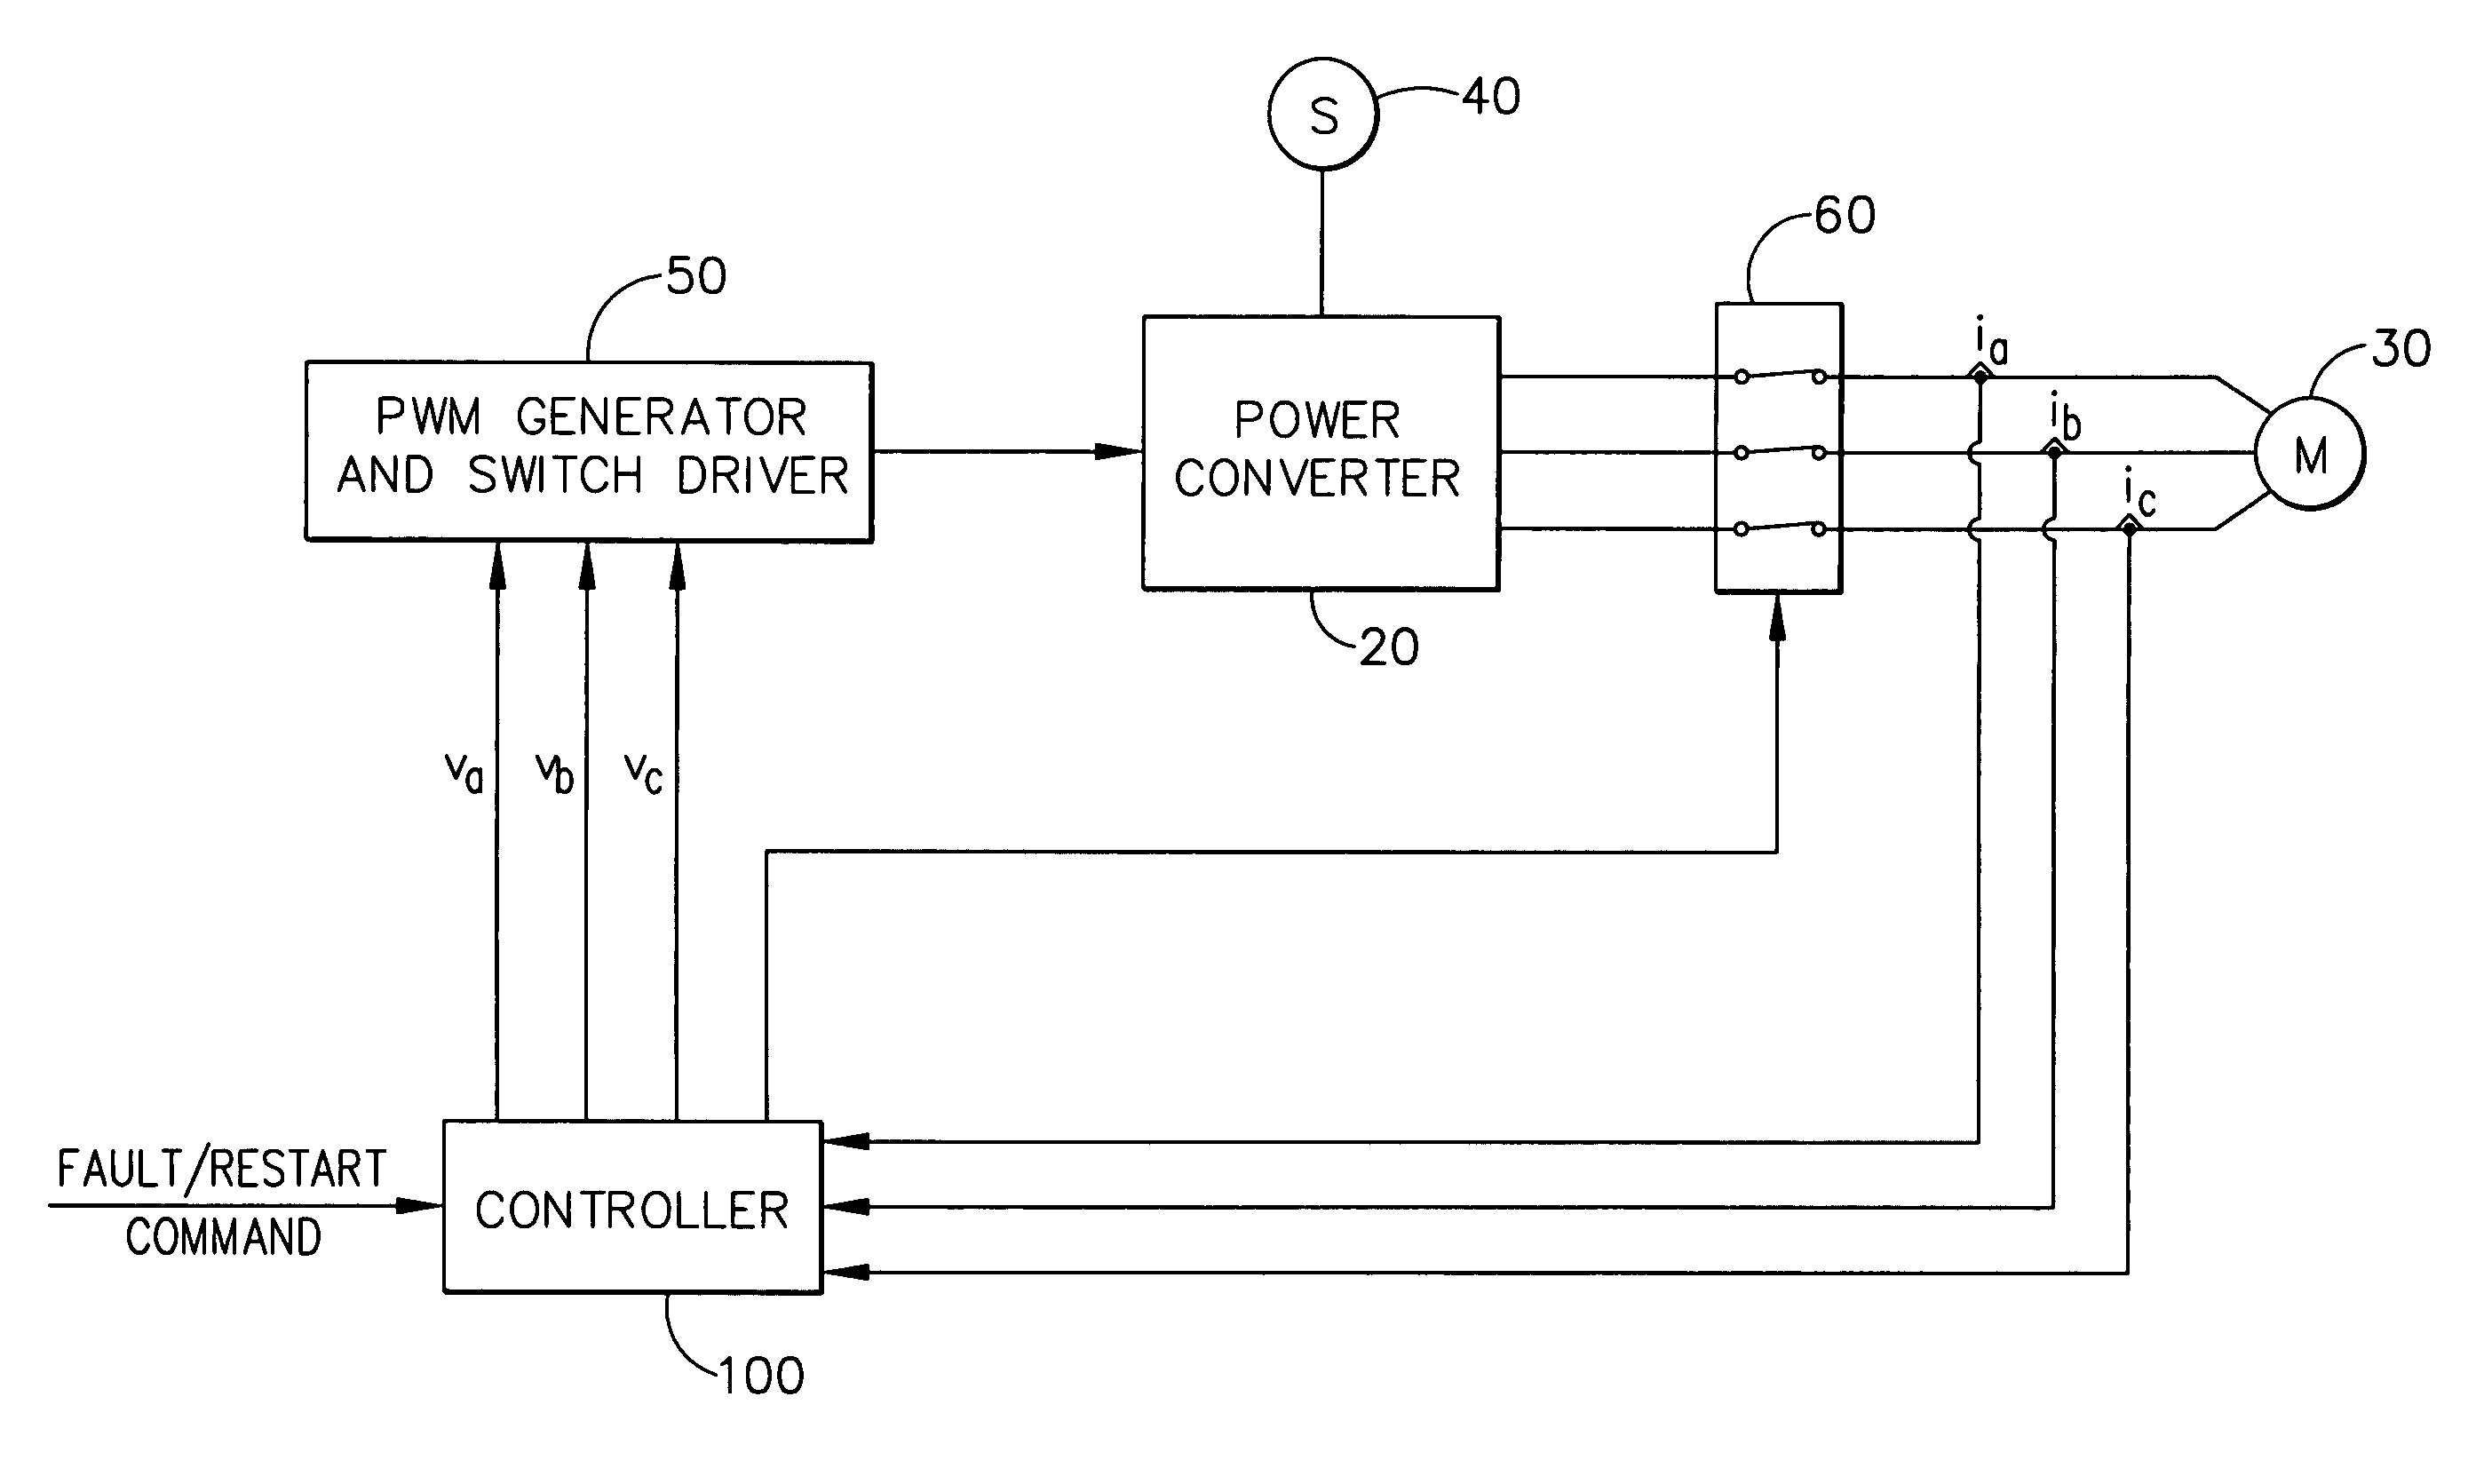 Power converter controlling apparatus and method applying a fault protection scheme in a motor drive system